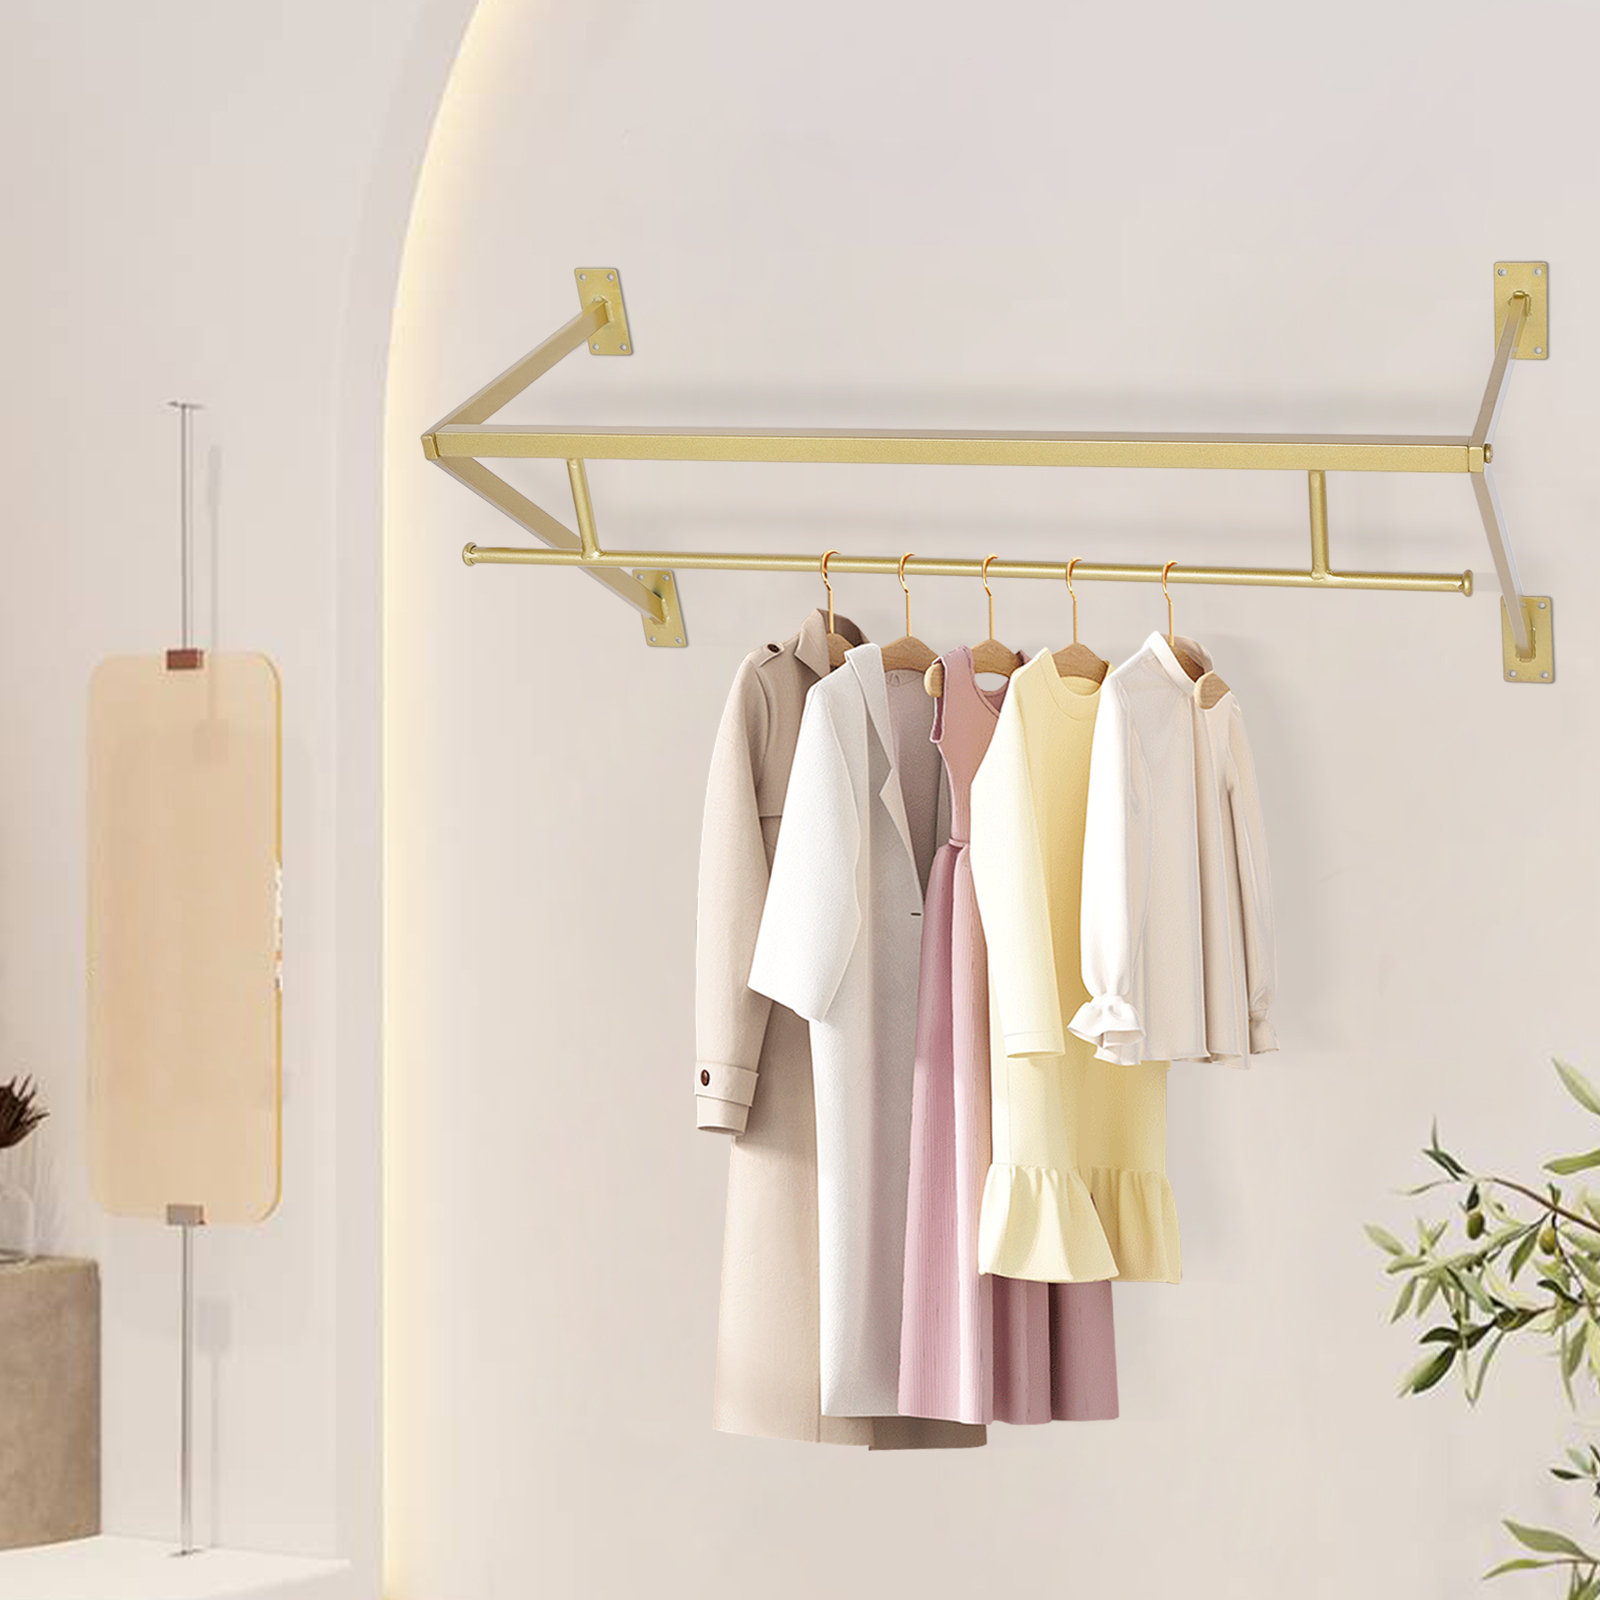 Everly Quinn 31.5'' Wall Mounted Clothes Rack Industrial Pipe Display  Garment Rack & Reviews